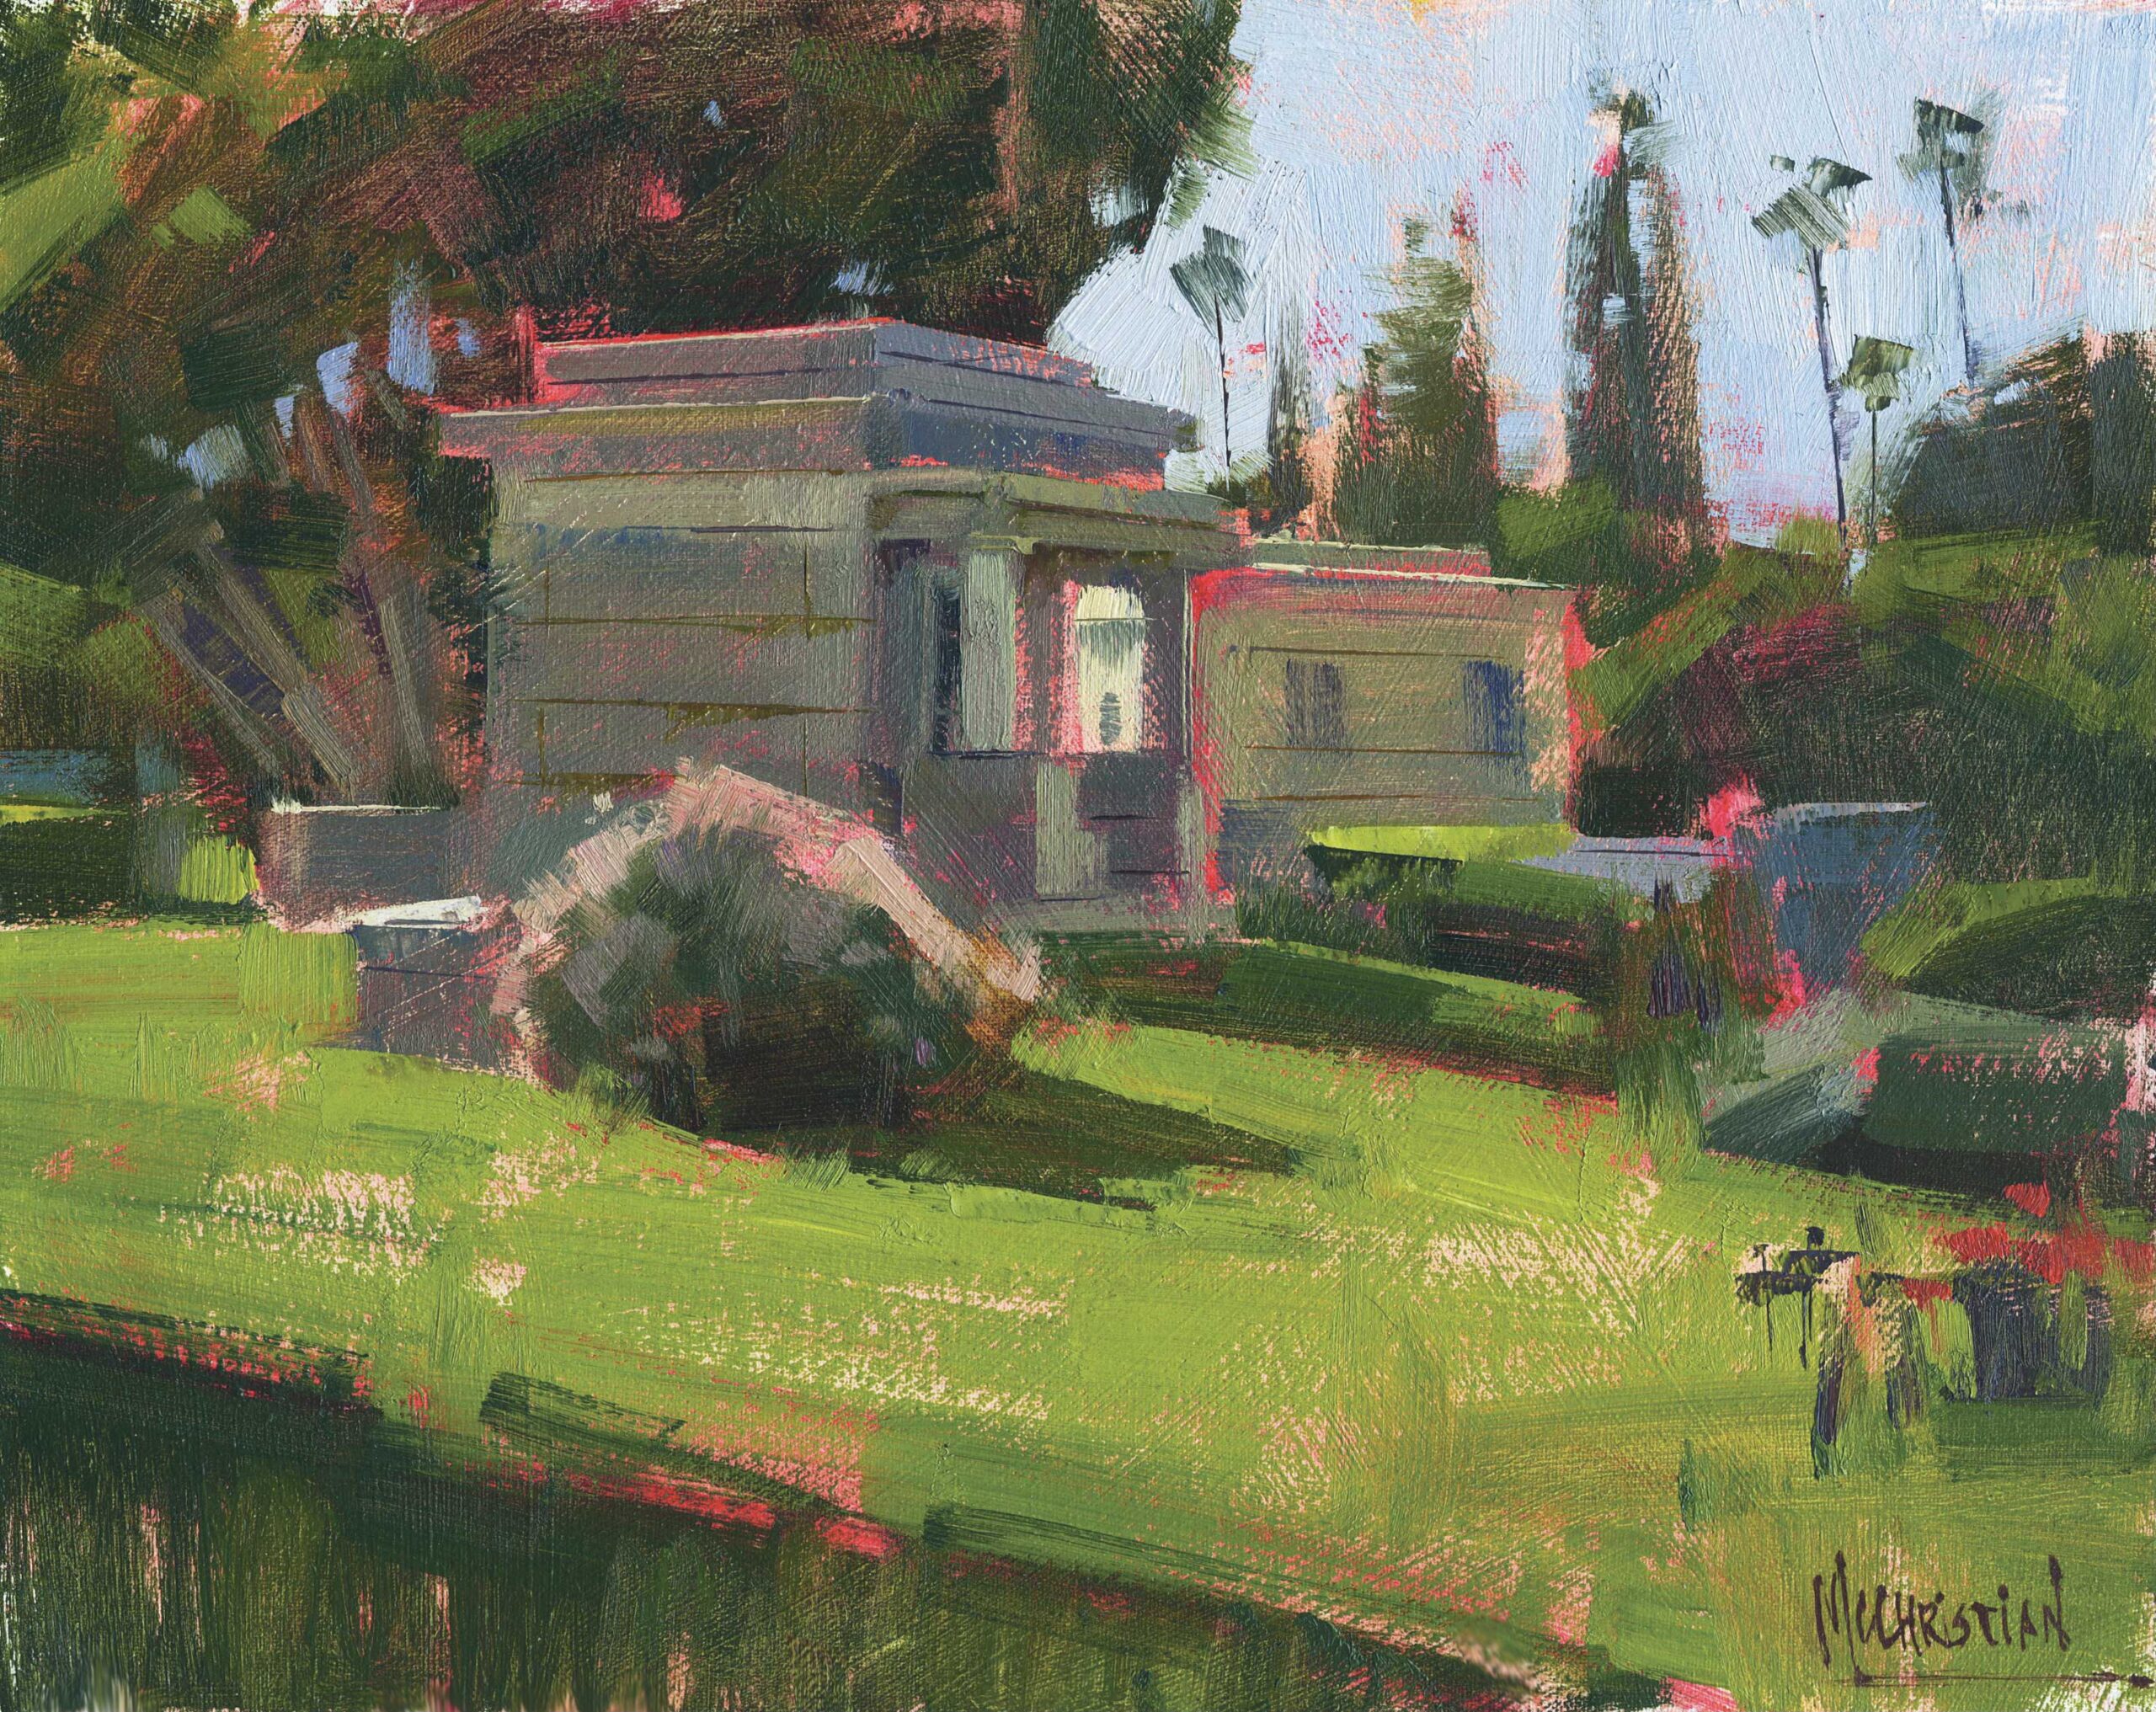 Landscape painting - Jennifer McChristian, “Afternoon Shadows,” 2020, oil on panel, 8 x 10 in., Collection the artist, Plein air